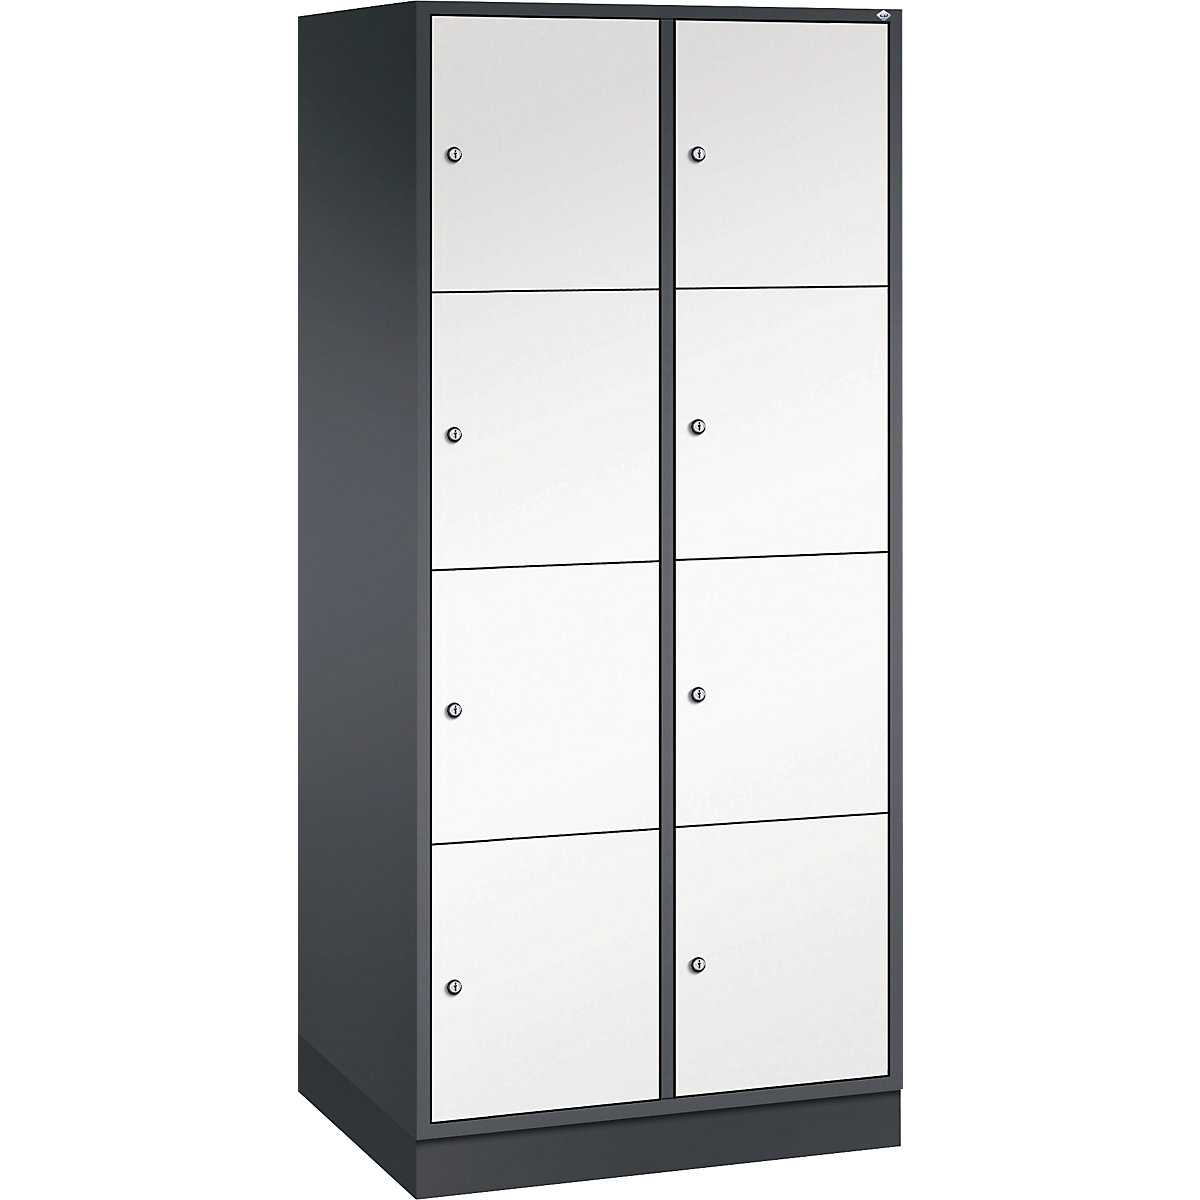 INTRO steel compartment locker, compartment height 435 mm – C+P, WxD 820 x 600 mm, 8 compartments, black grey body, pure white doors